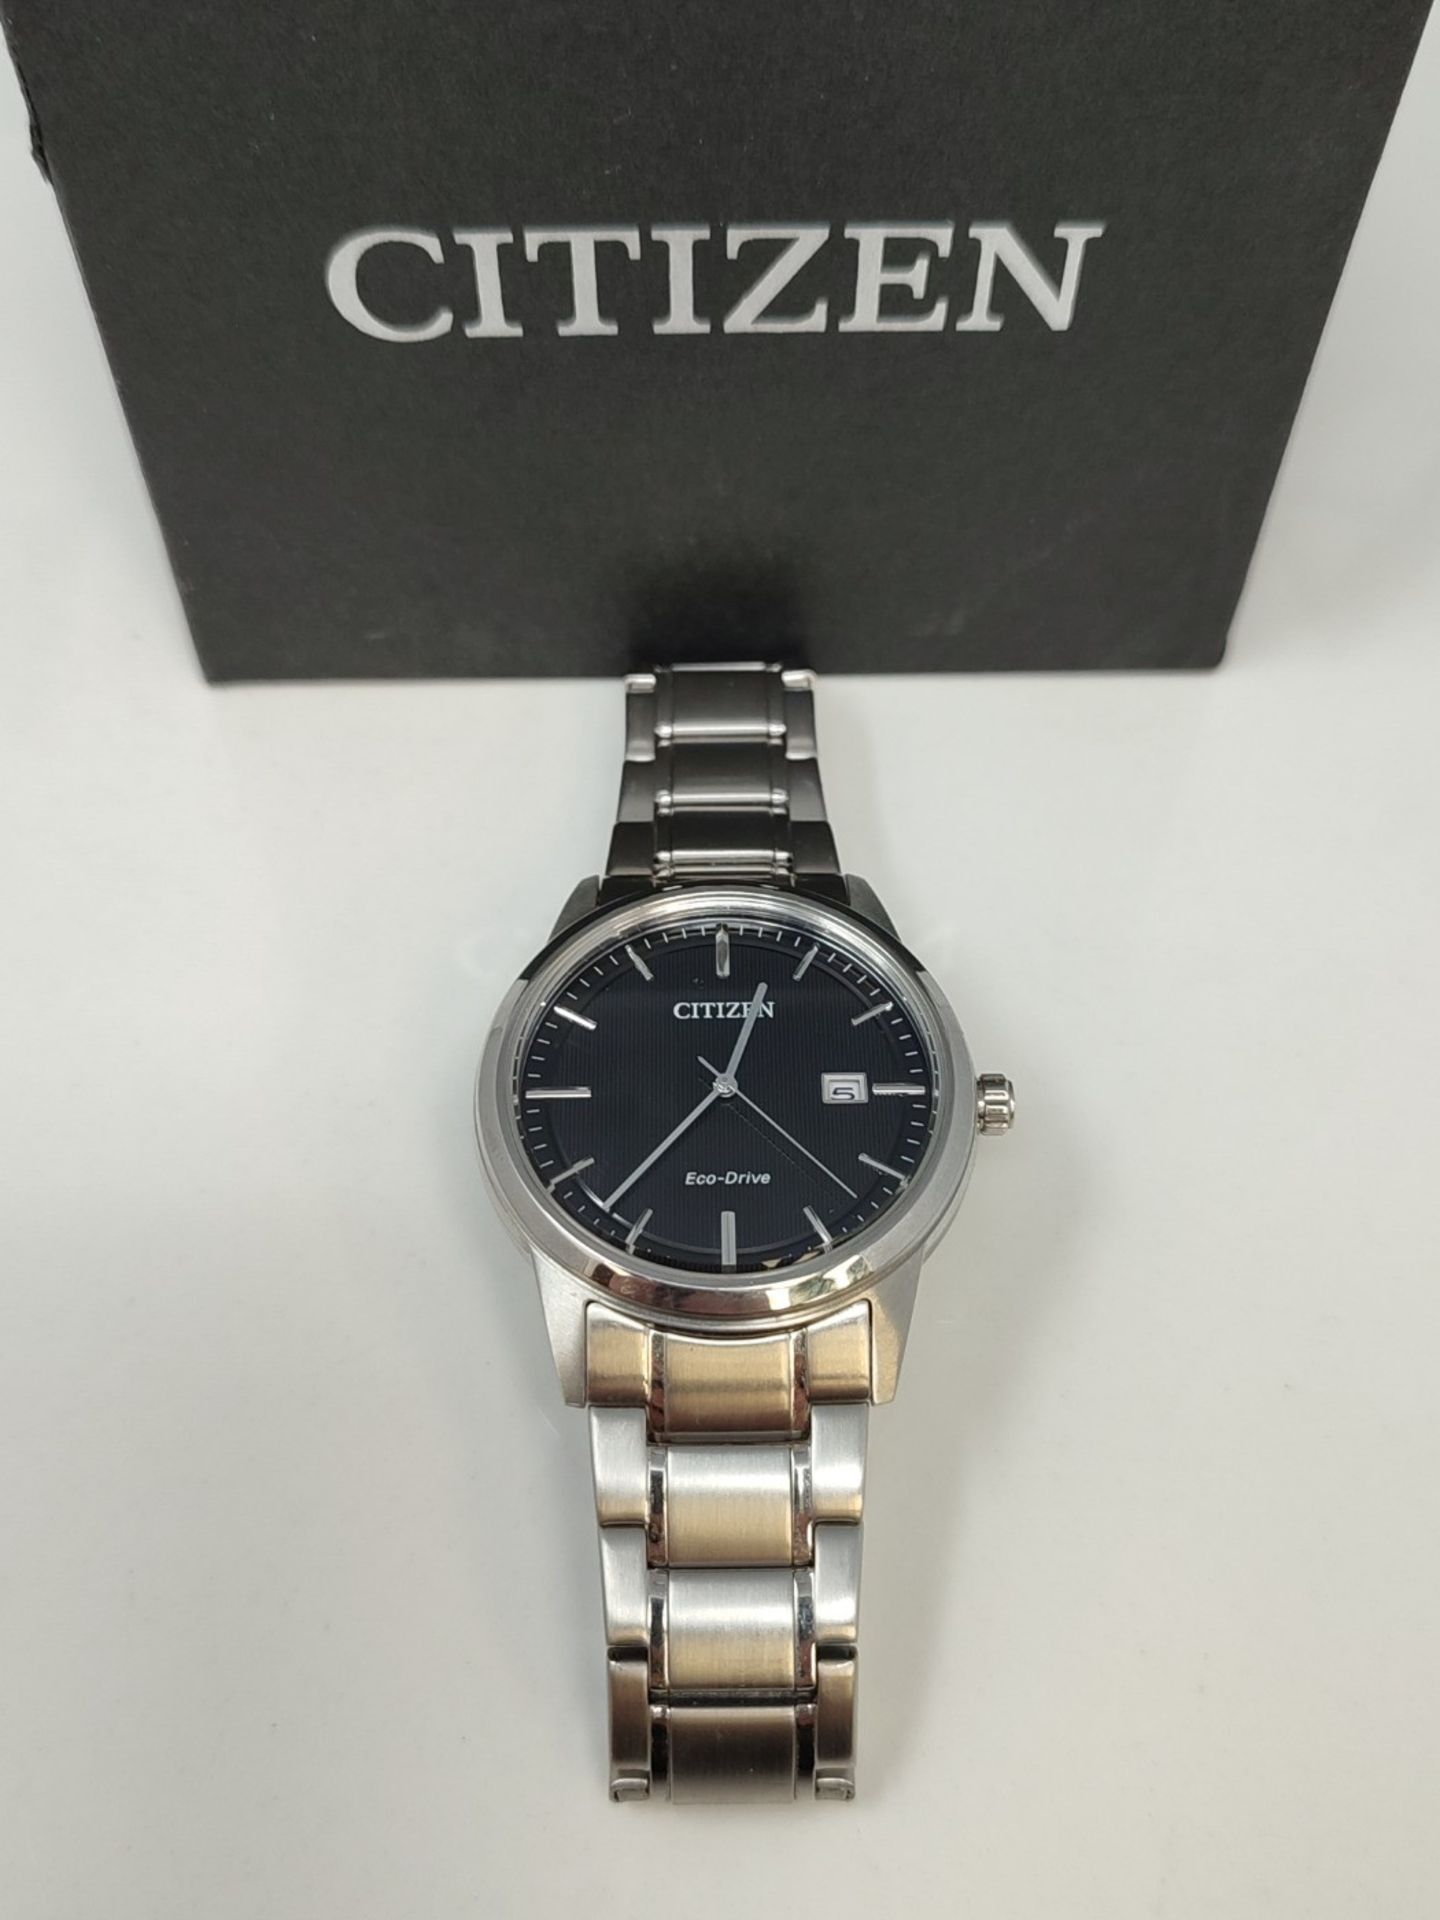 RRP £117.00 CITIZEN Men's Analog Quartz Watch with Stainless Steel Bracelet AW1231-07E, Black - Image 2 of 3